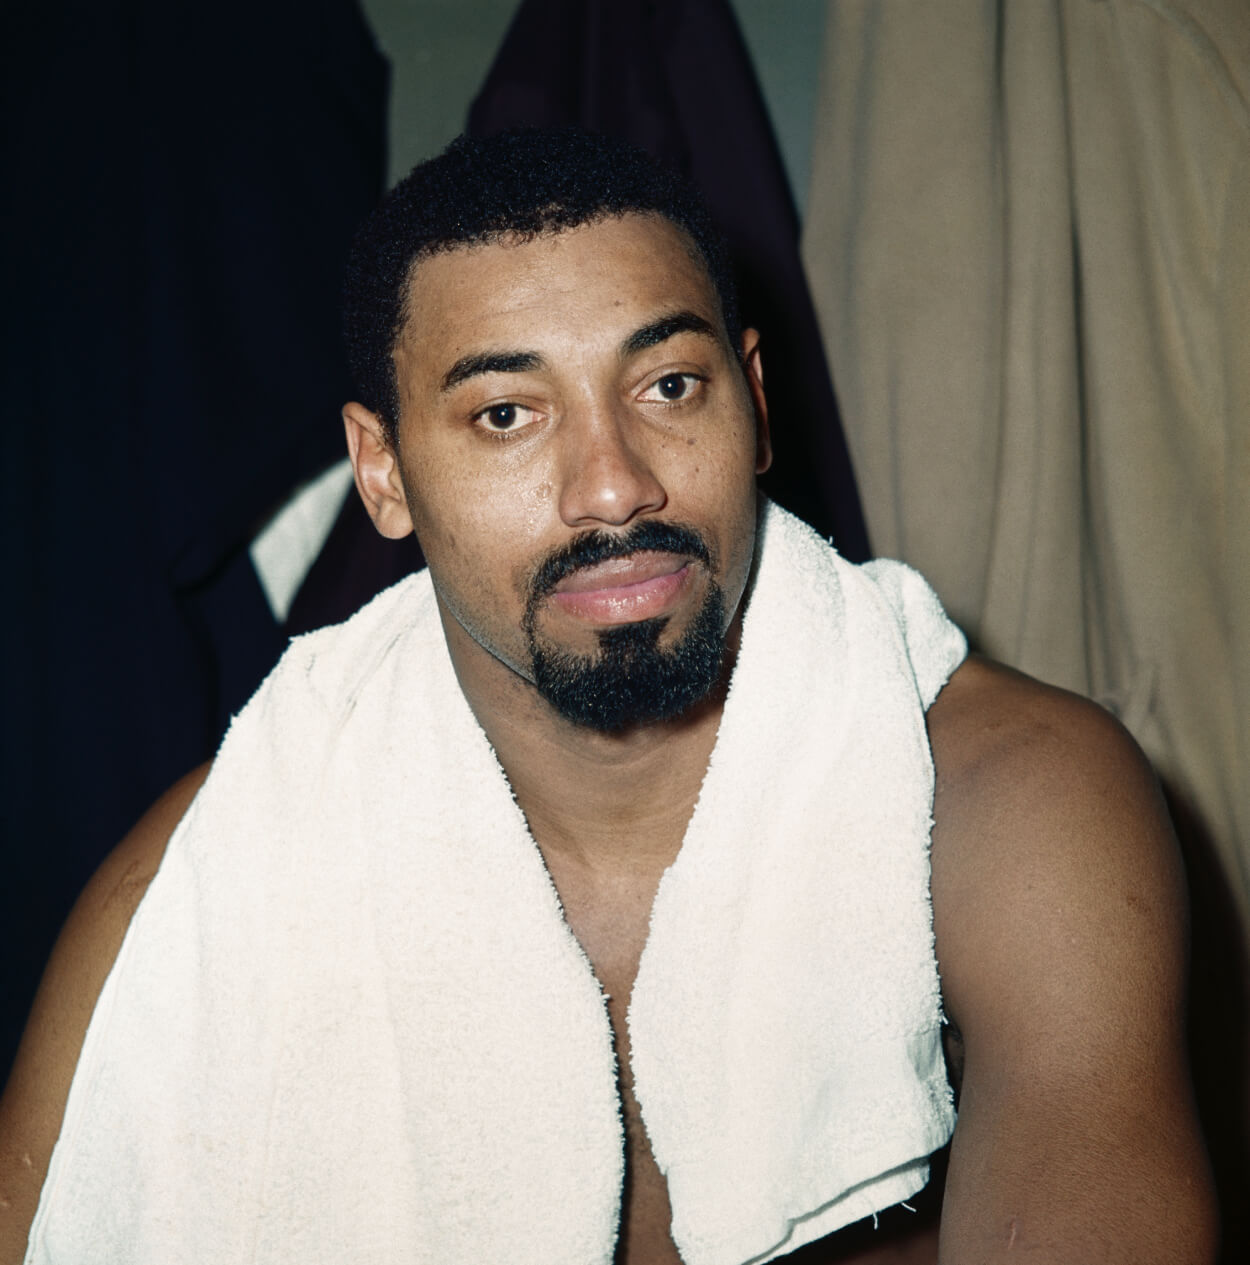 Here Are 5 Things That Went Unnoticed When Wilt Chamberlain Scored 100 Points Against the Knicks